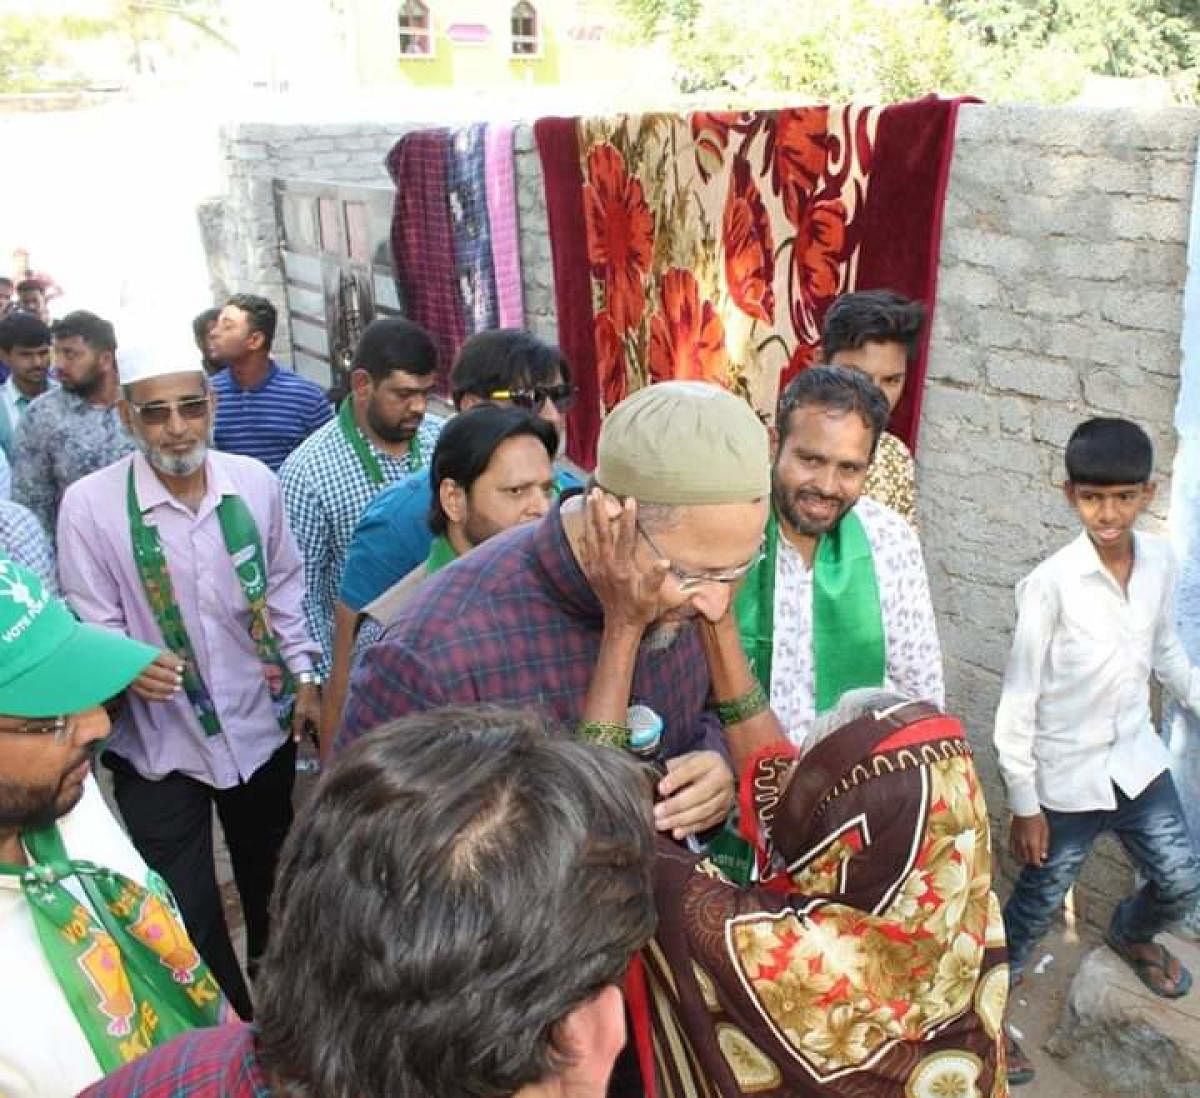 Asaduddin Owaisi during his campaign in Hyderabad Old City. DH PHOTO